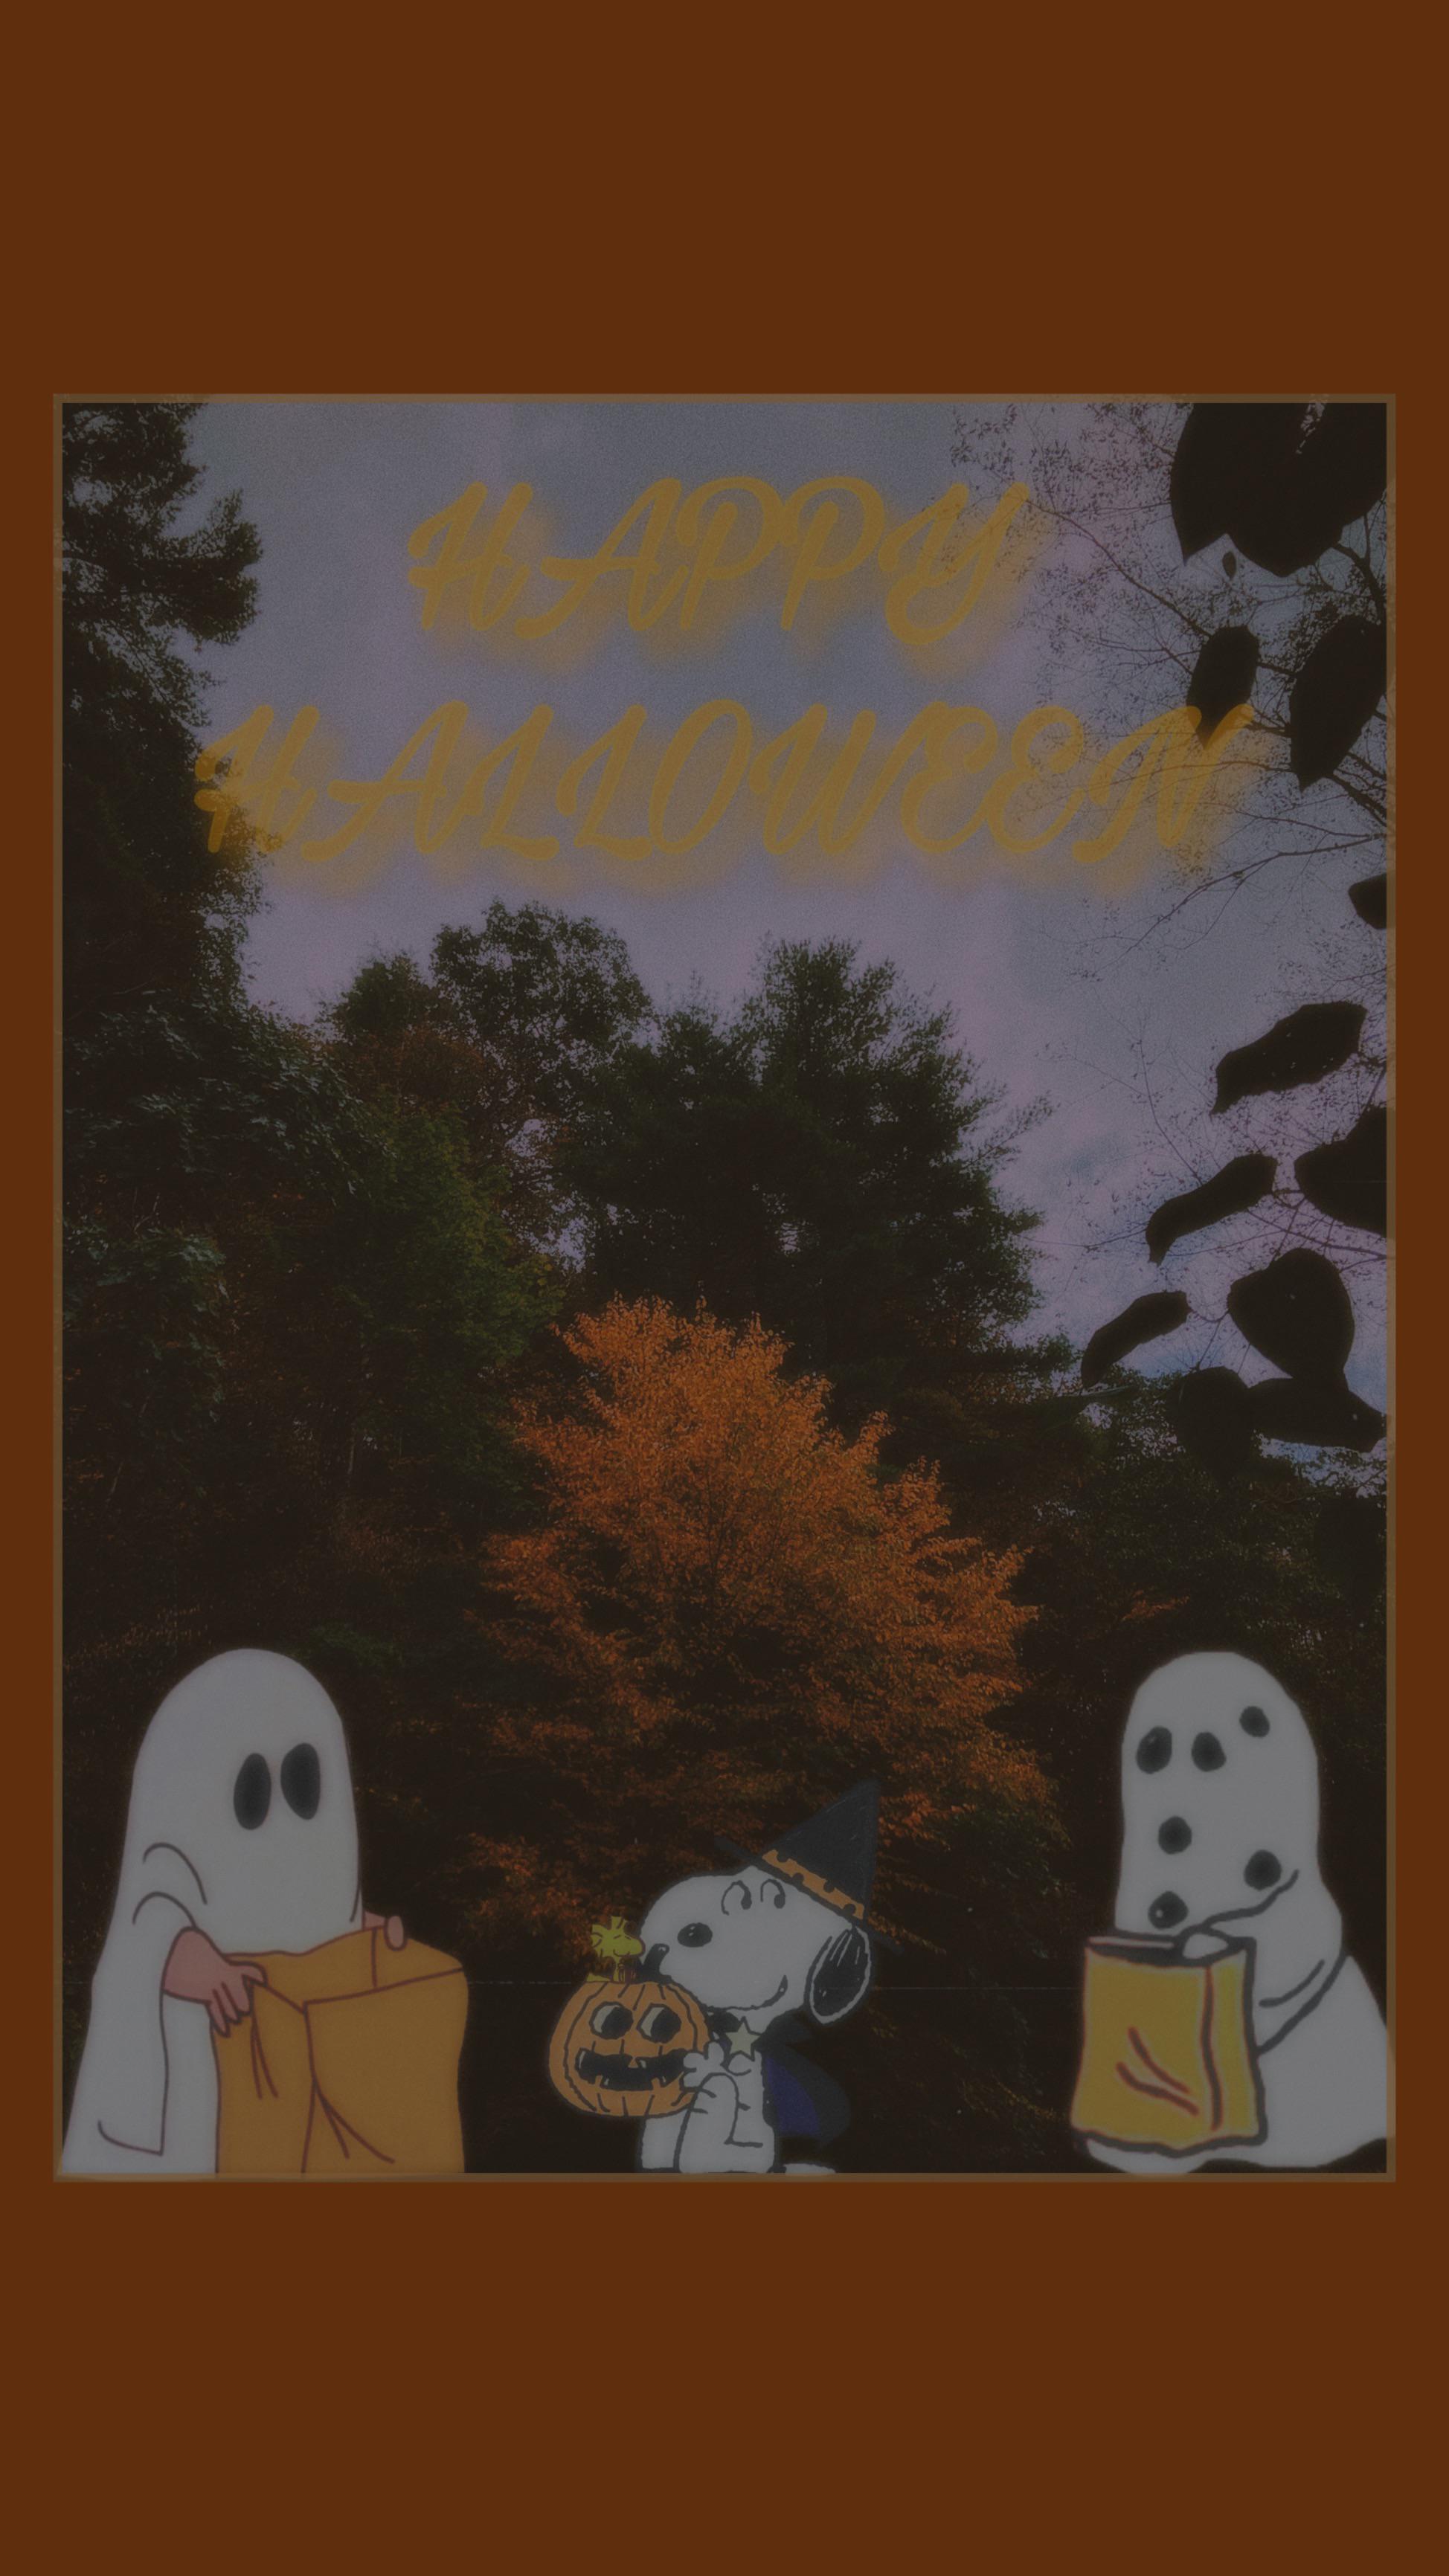 Halloween aesthetic background with a picture of a dog and two ghosts - Charlie Brown, Halloween